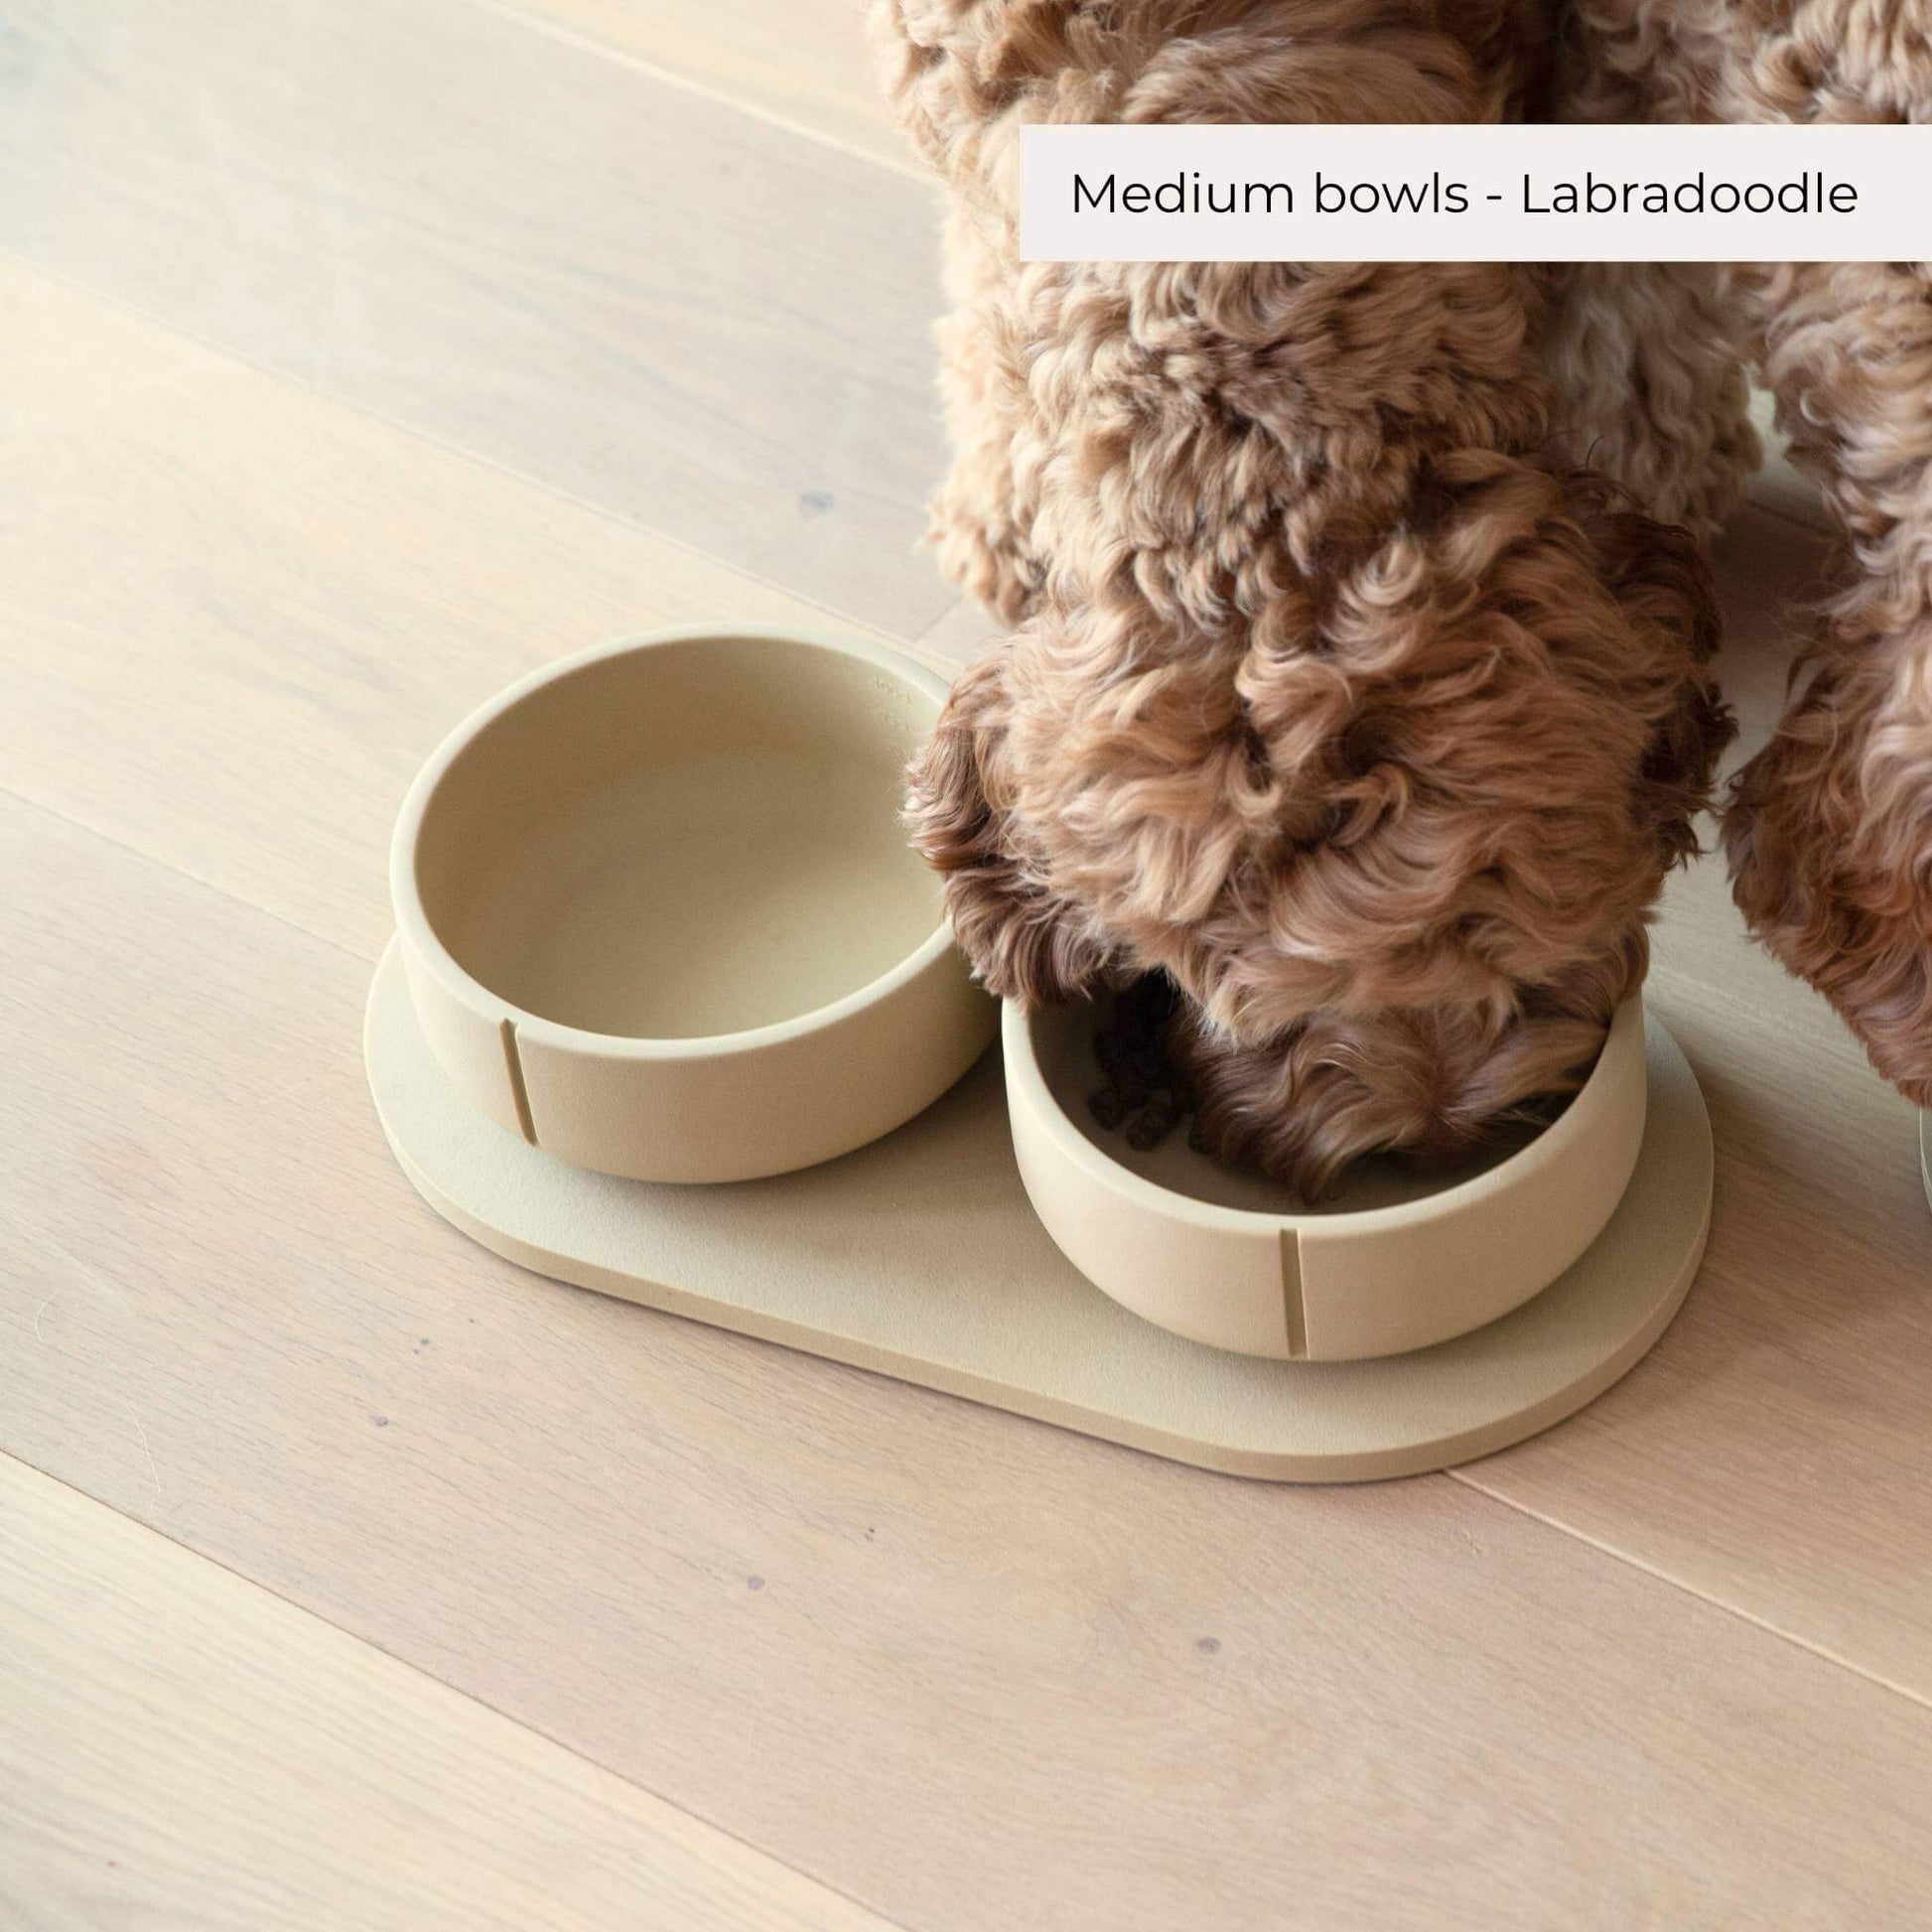 A Pino set withe two camel brown bowls and a tray. A dog eats out of it.